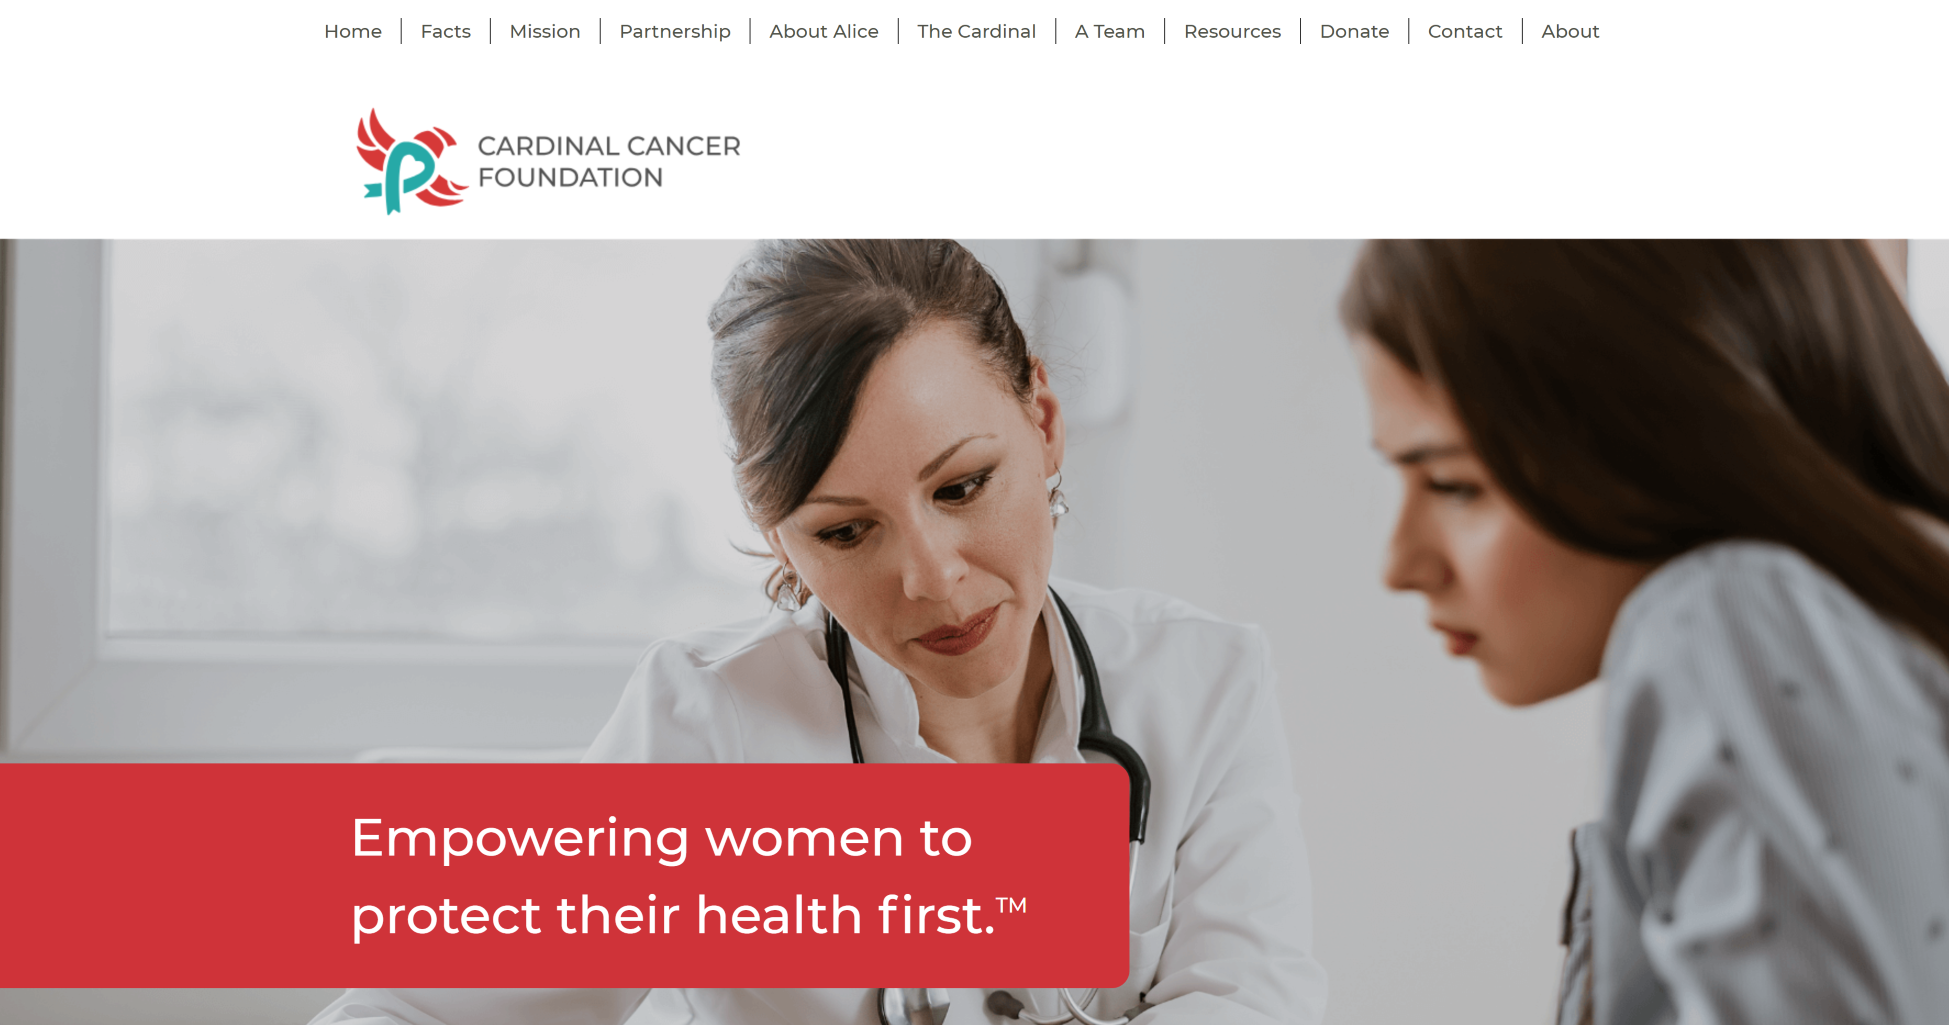 Cardinal Cancer Foundation: Empowering women to protect their health first.